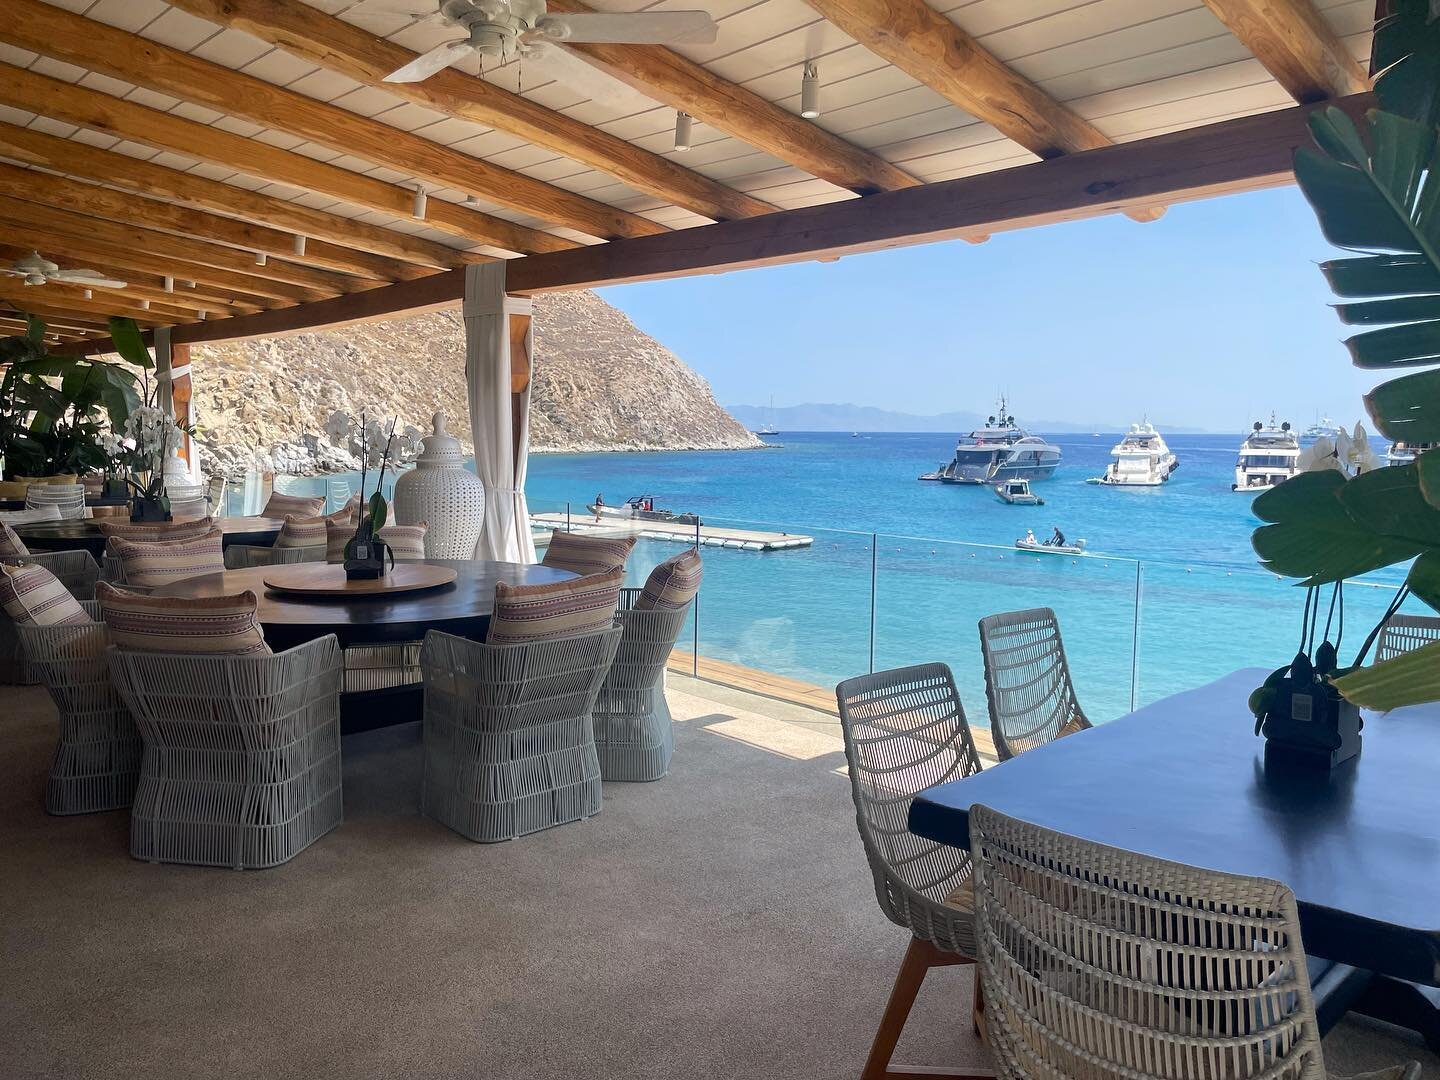 This view just keeps getting better and better! Can I just stay from lunch to dinner? 💙 #buddhabarmykonos #santamarinamykonos #mykonos #greece